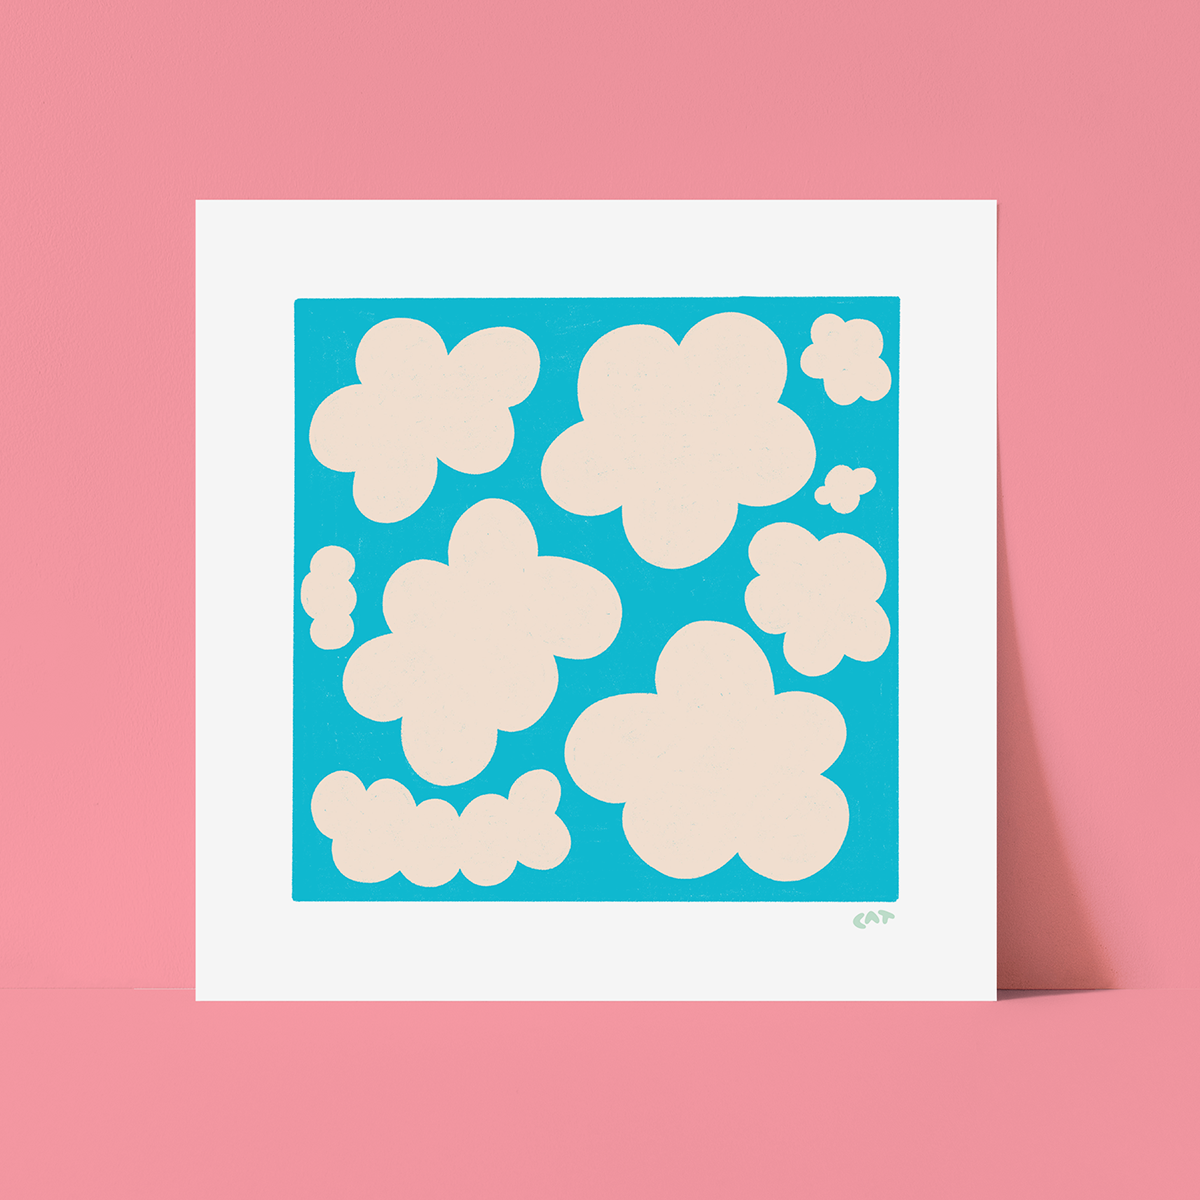 White unframed print of a blue square with white cloud-like shapes on top.